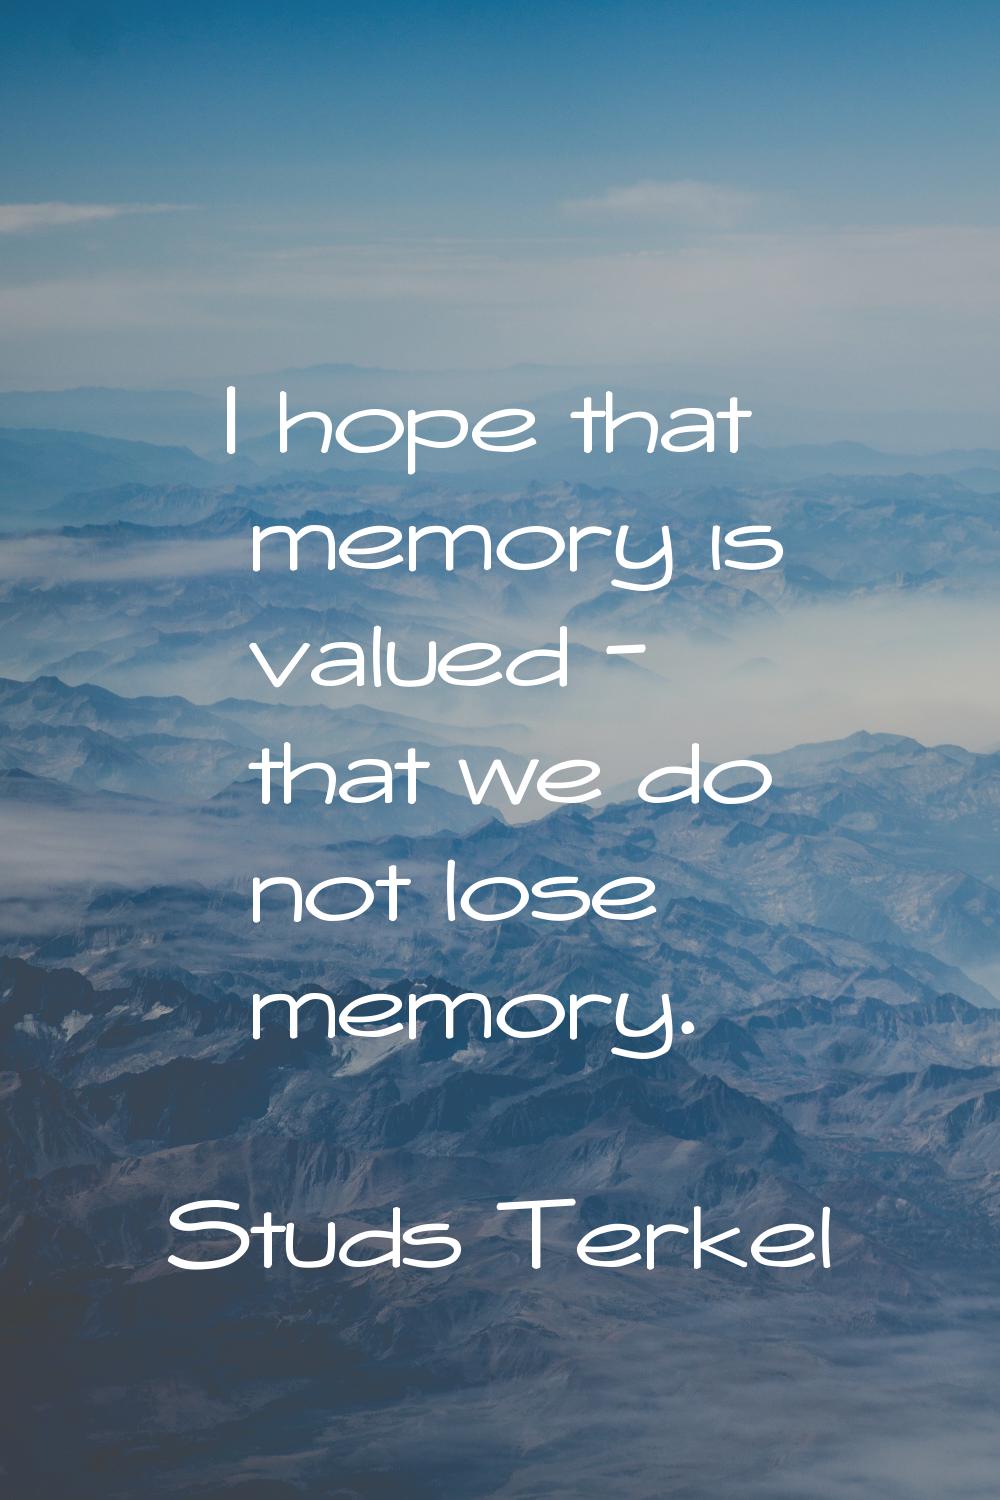 I hope that memory is valued - that we do not lose memory.